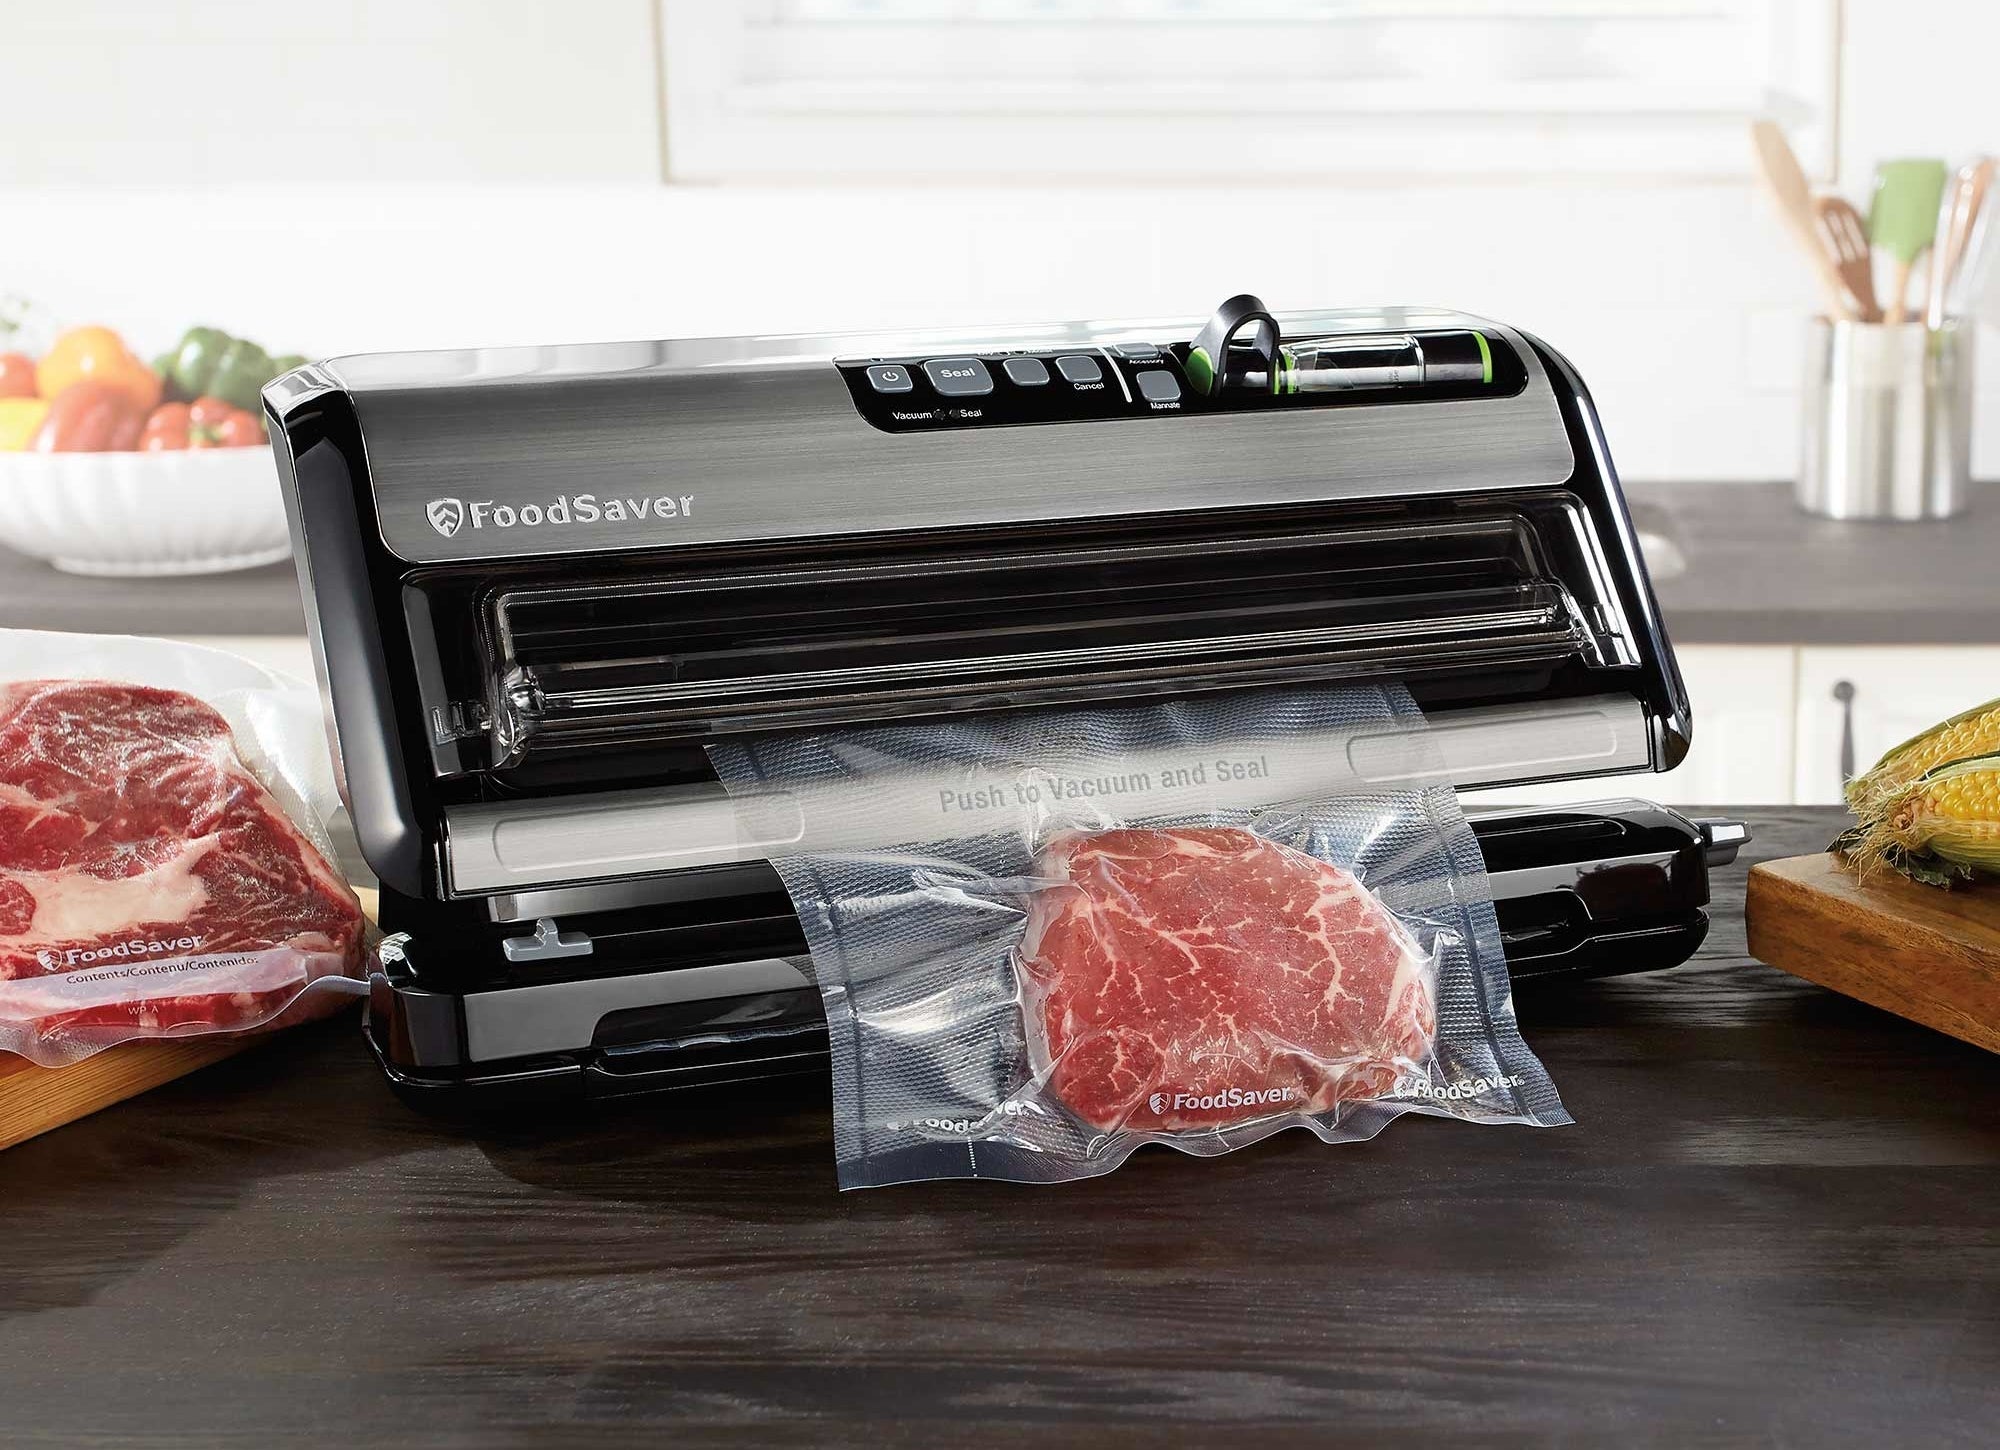 The vacuum sealer, sealing up some meat